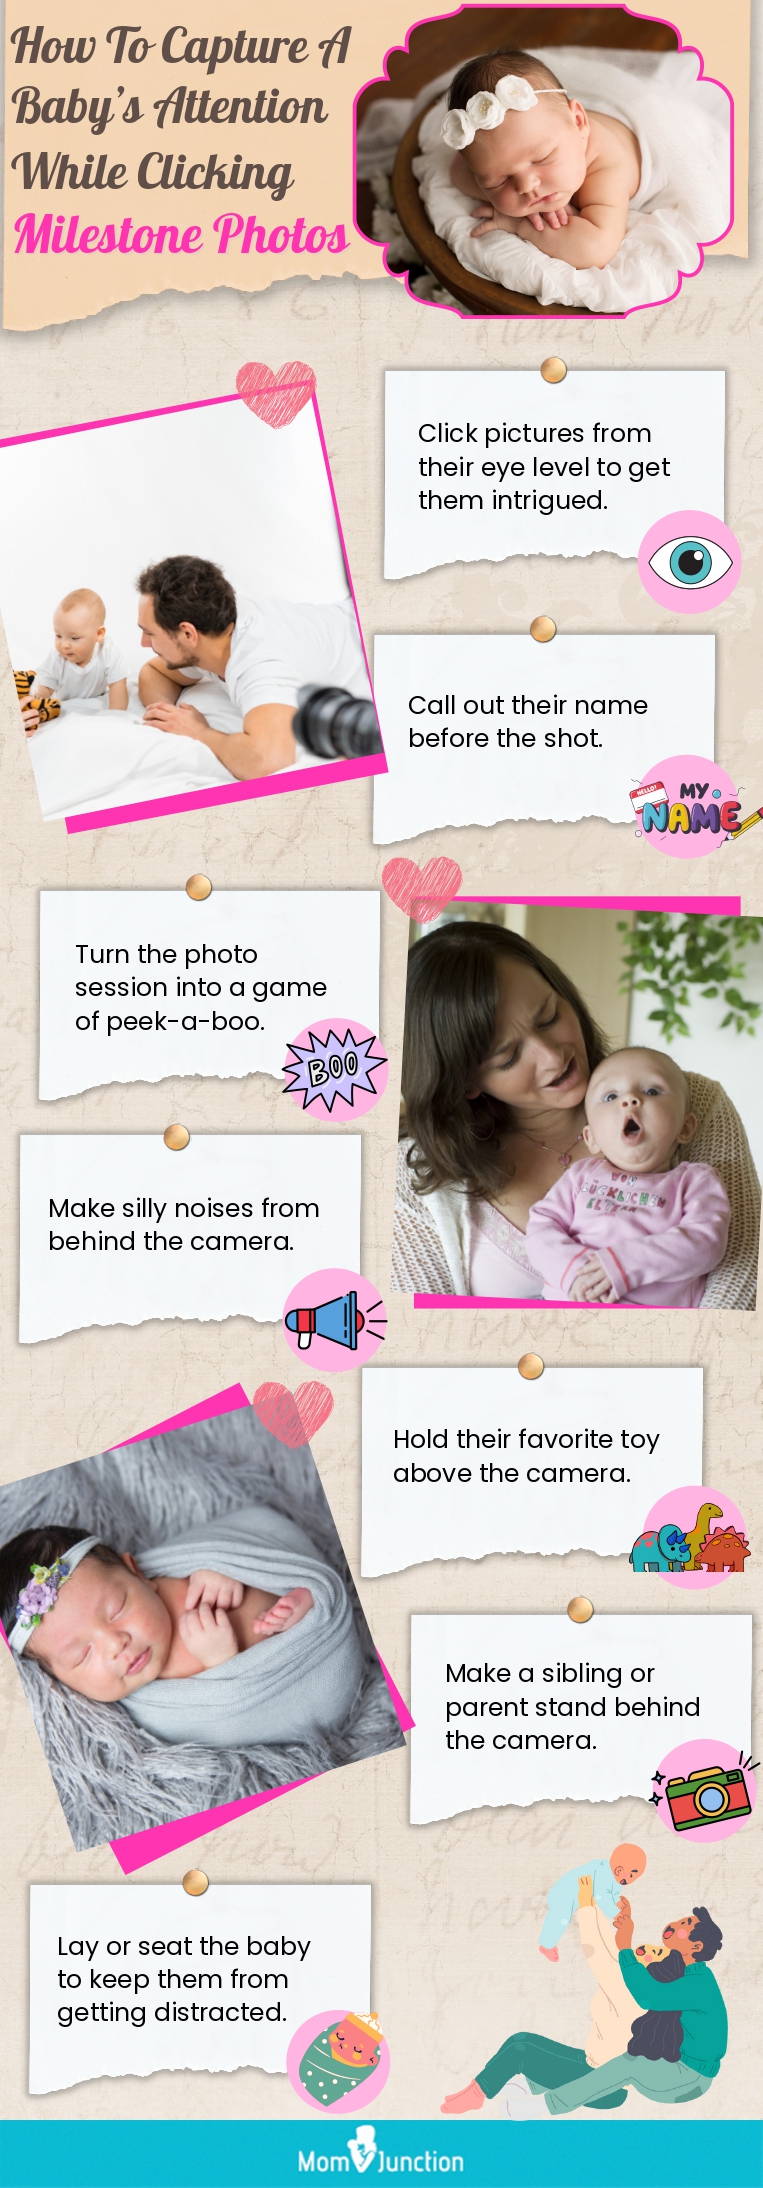 How To Capture A Baby’s Attention While Clicking Milestone Photos (infographic)